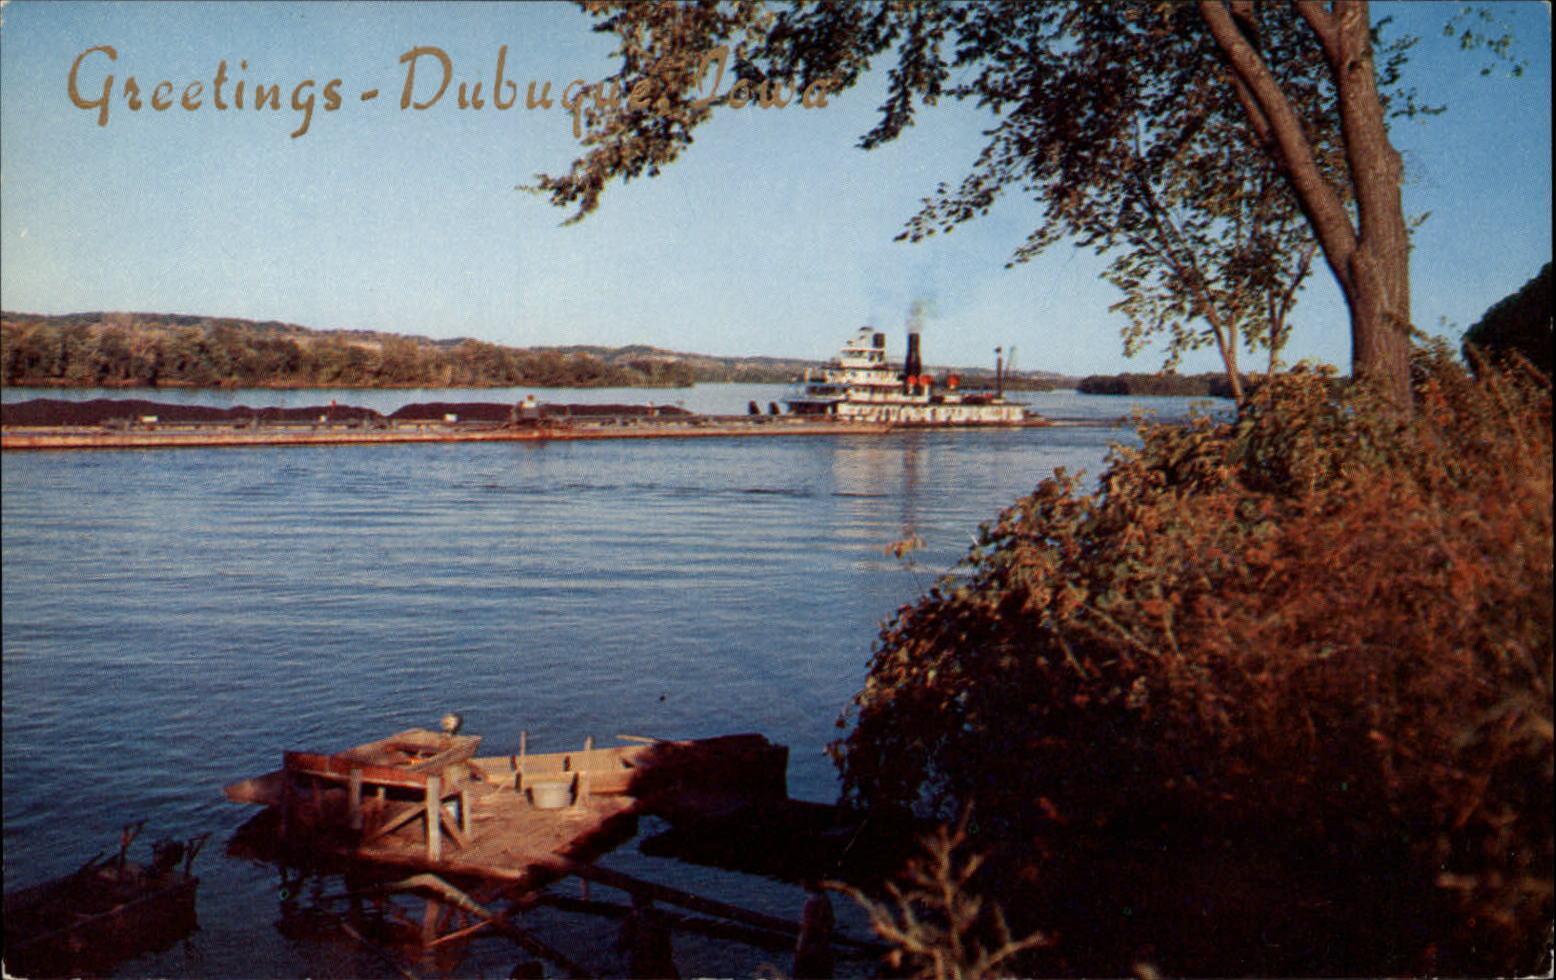 Greetings Dubuque Iowa Mississippi River ship pier ~ 1950s-60s vintage postcard